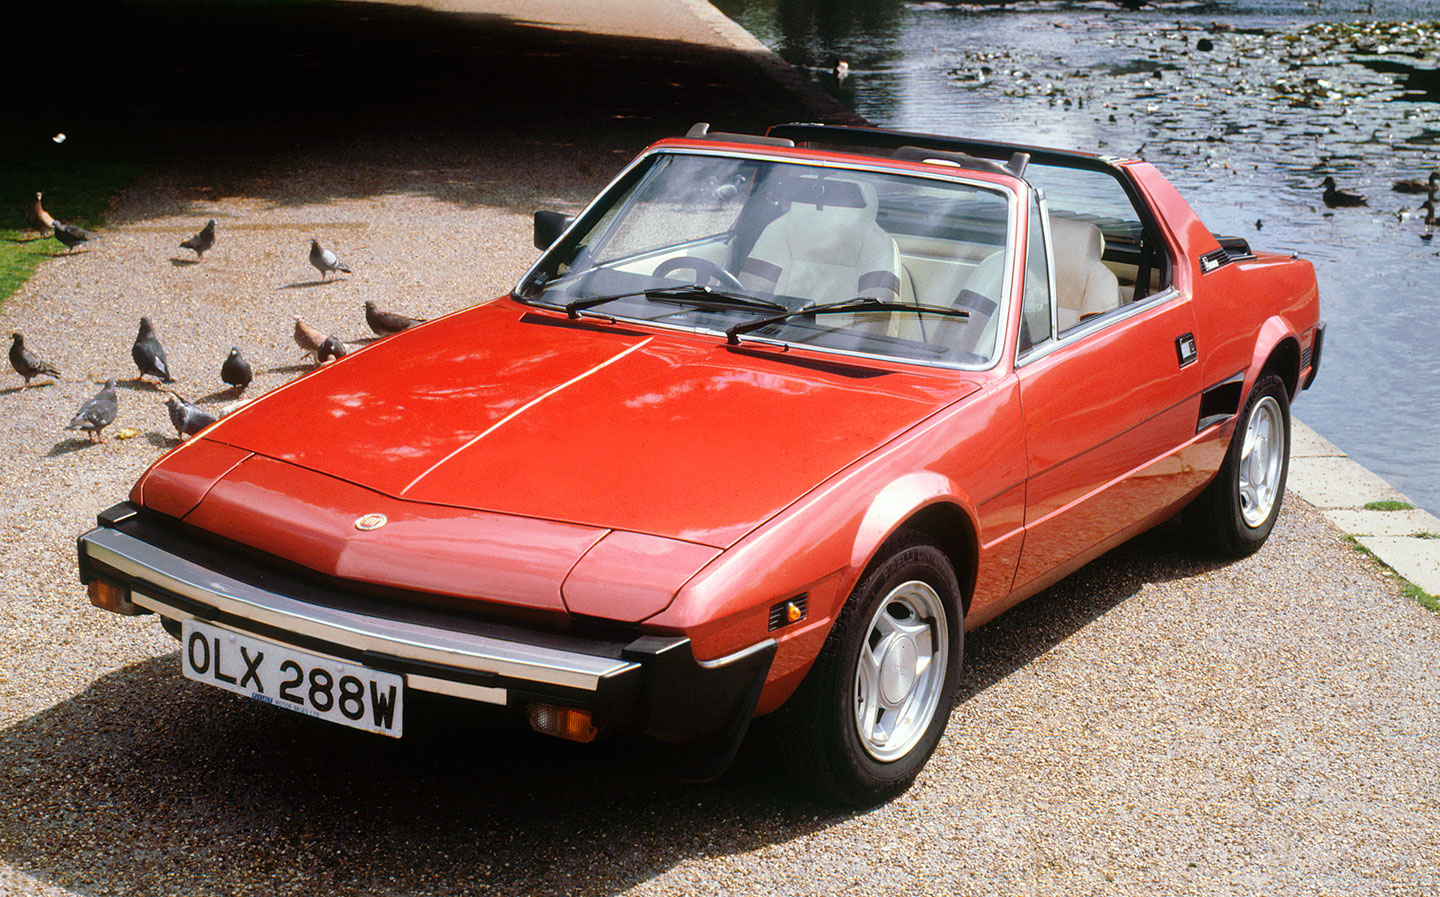 Top five wedge shaped cars - Fiat X19